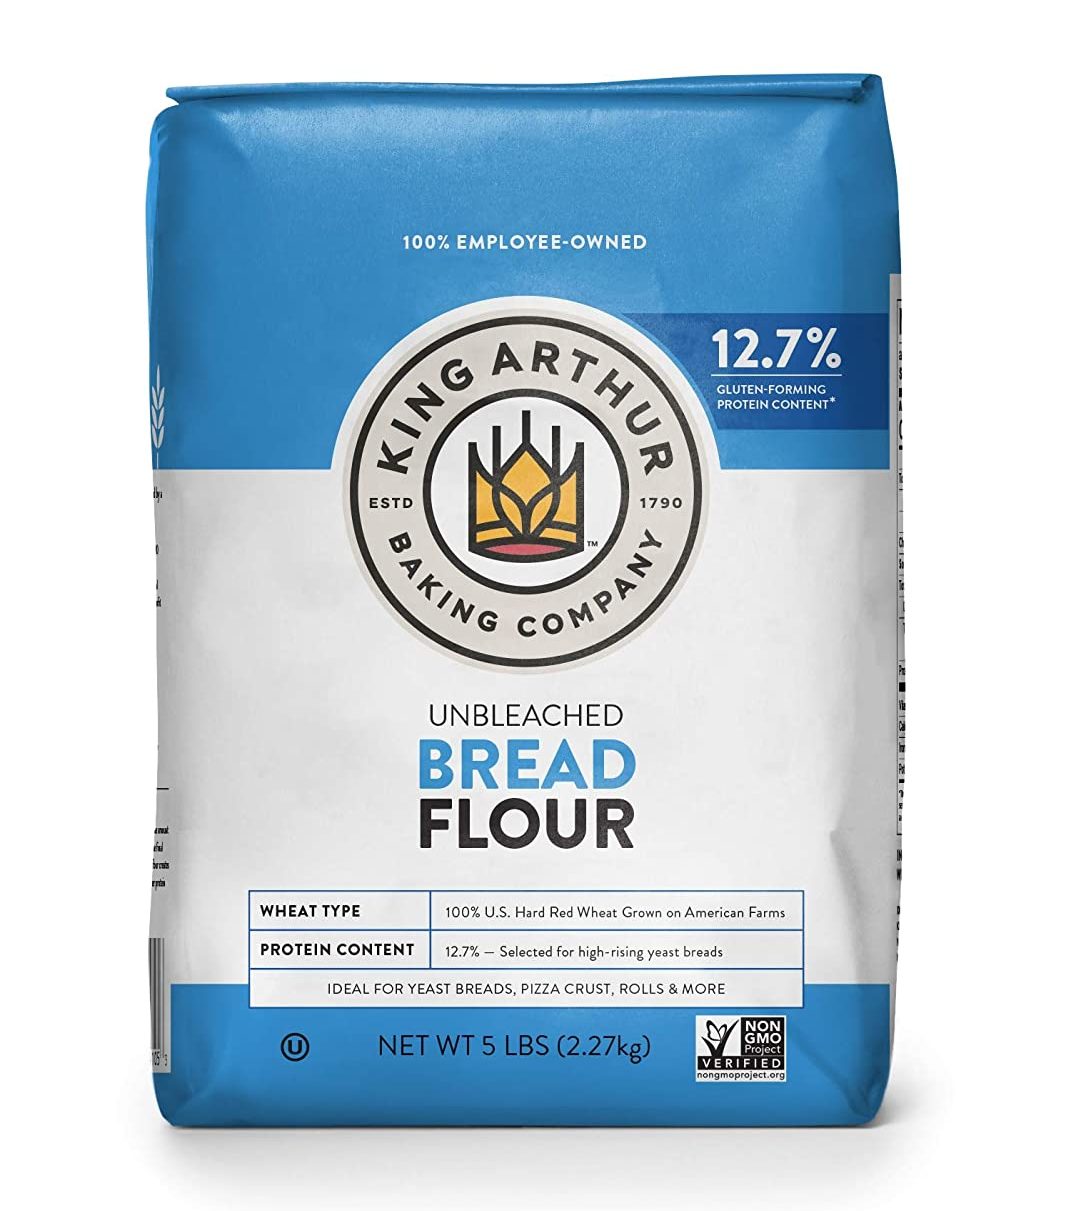 bread flour is one of the best all-purpose flour substitutes